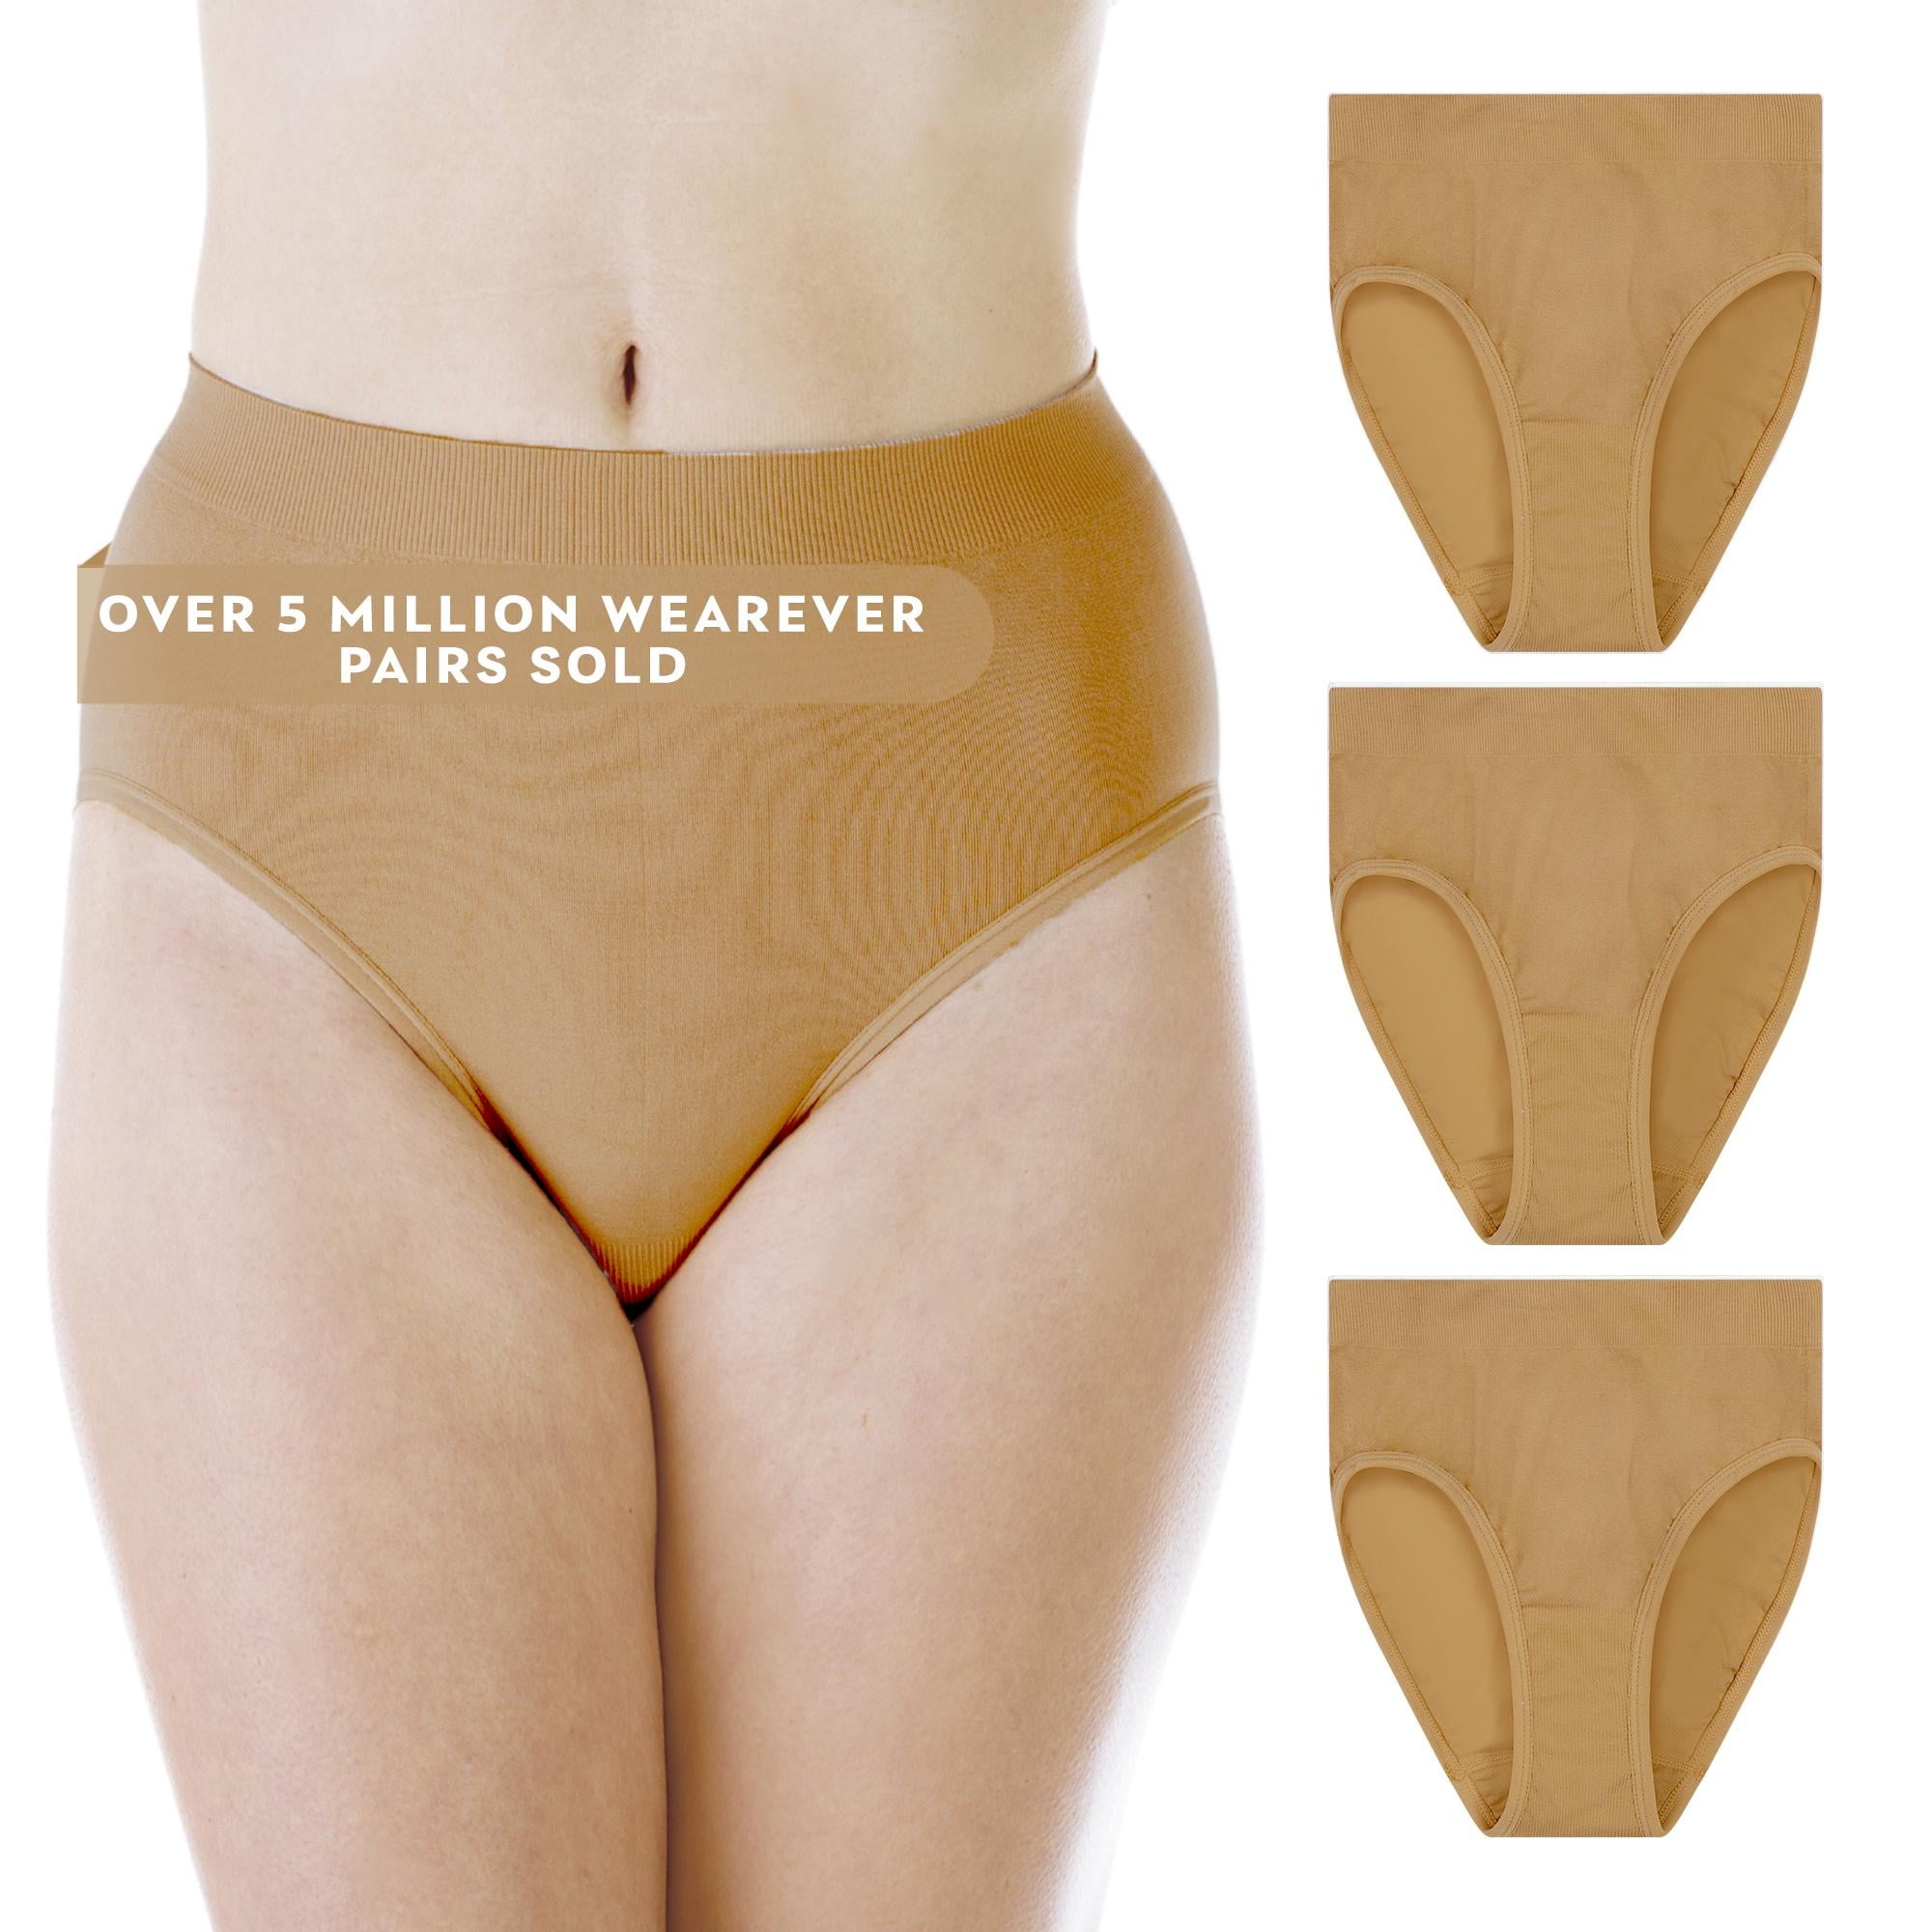 Wearever – Incontinence undergarments •